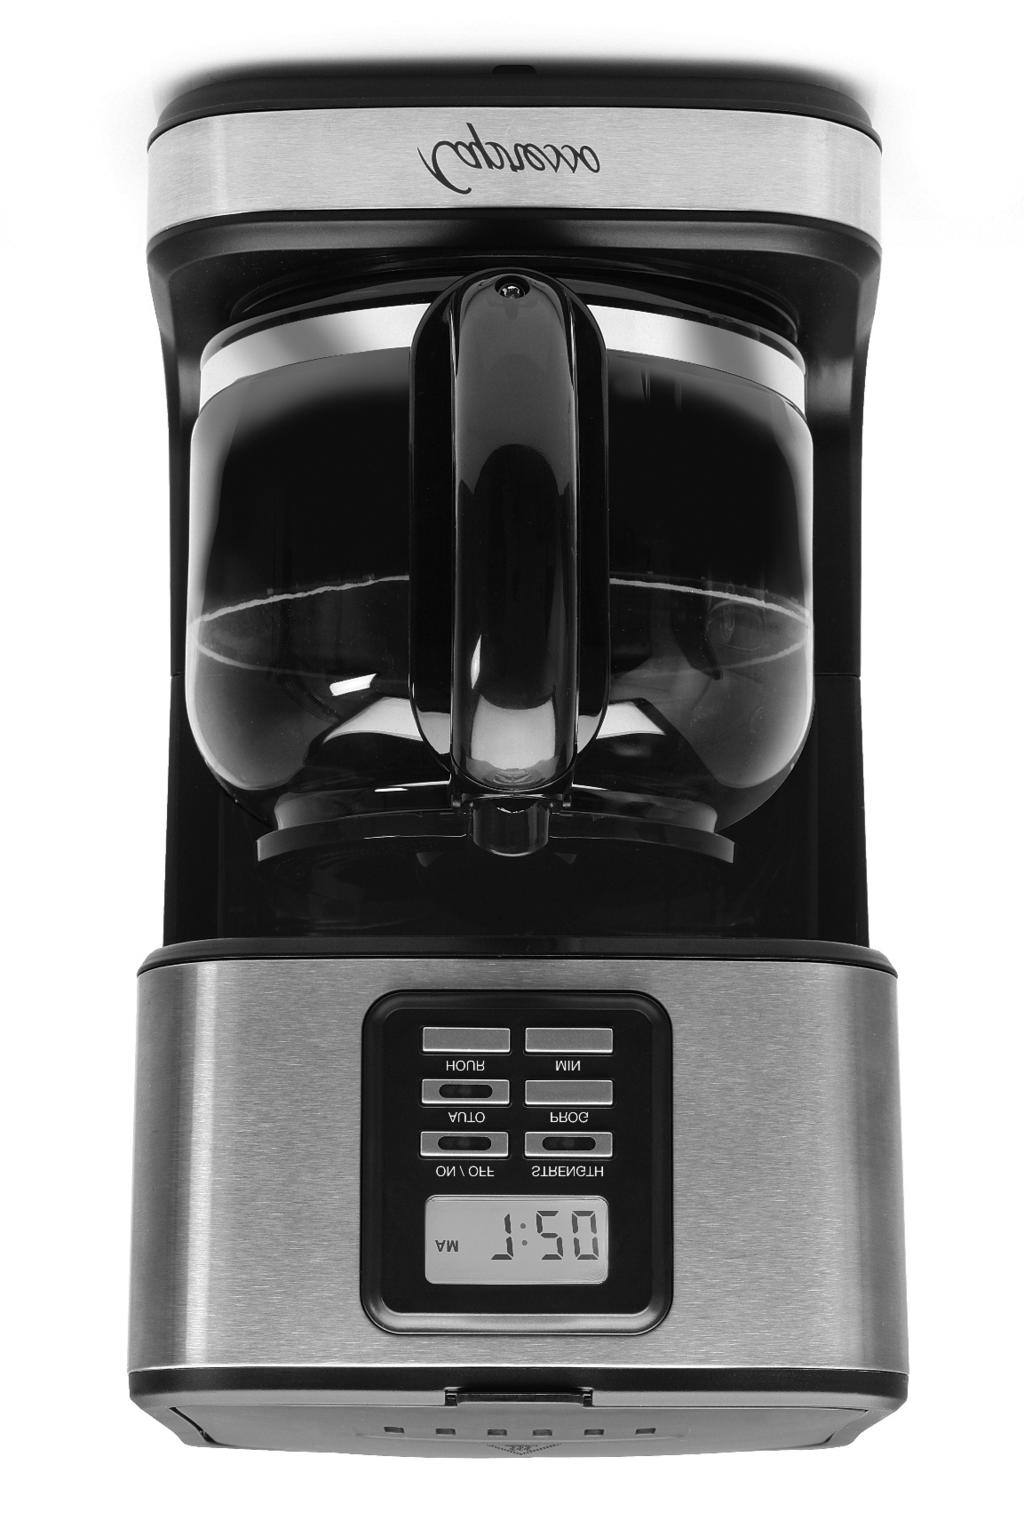 SG220 12-Cup Coffee Maker Model #427.